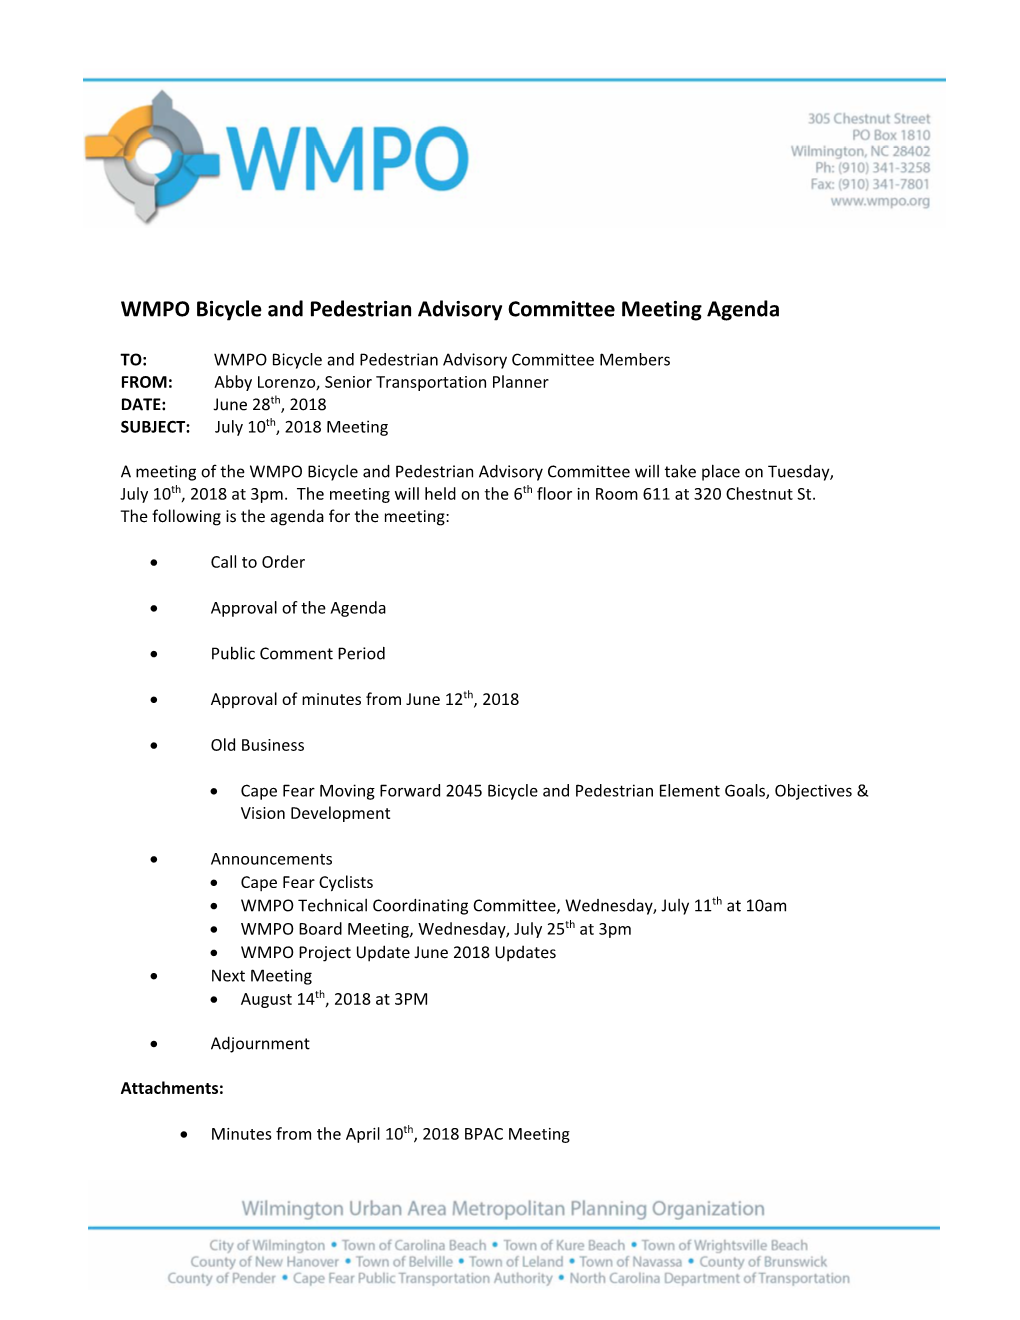 WMPO Bicycle and Pedestrian Advisory Committee Meeting Agenda